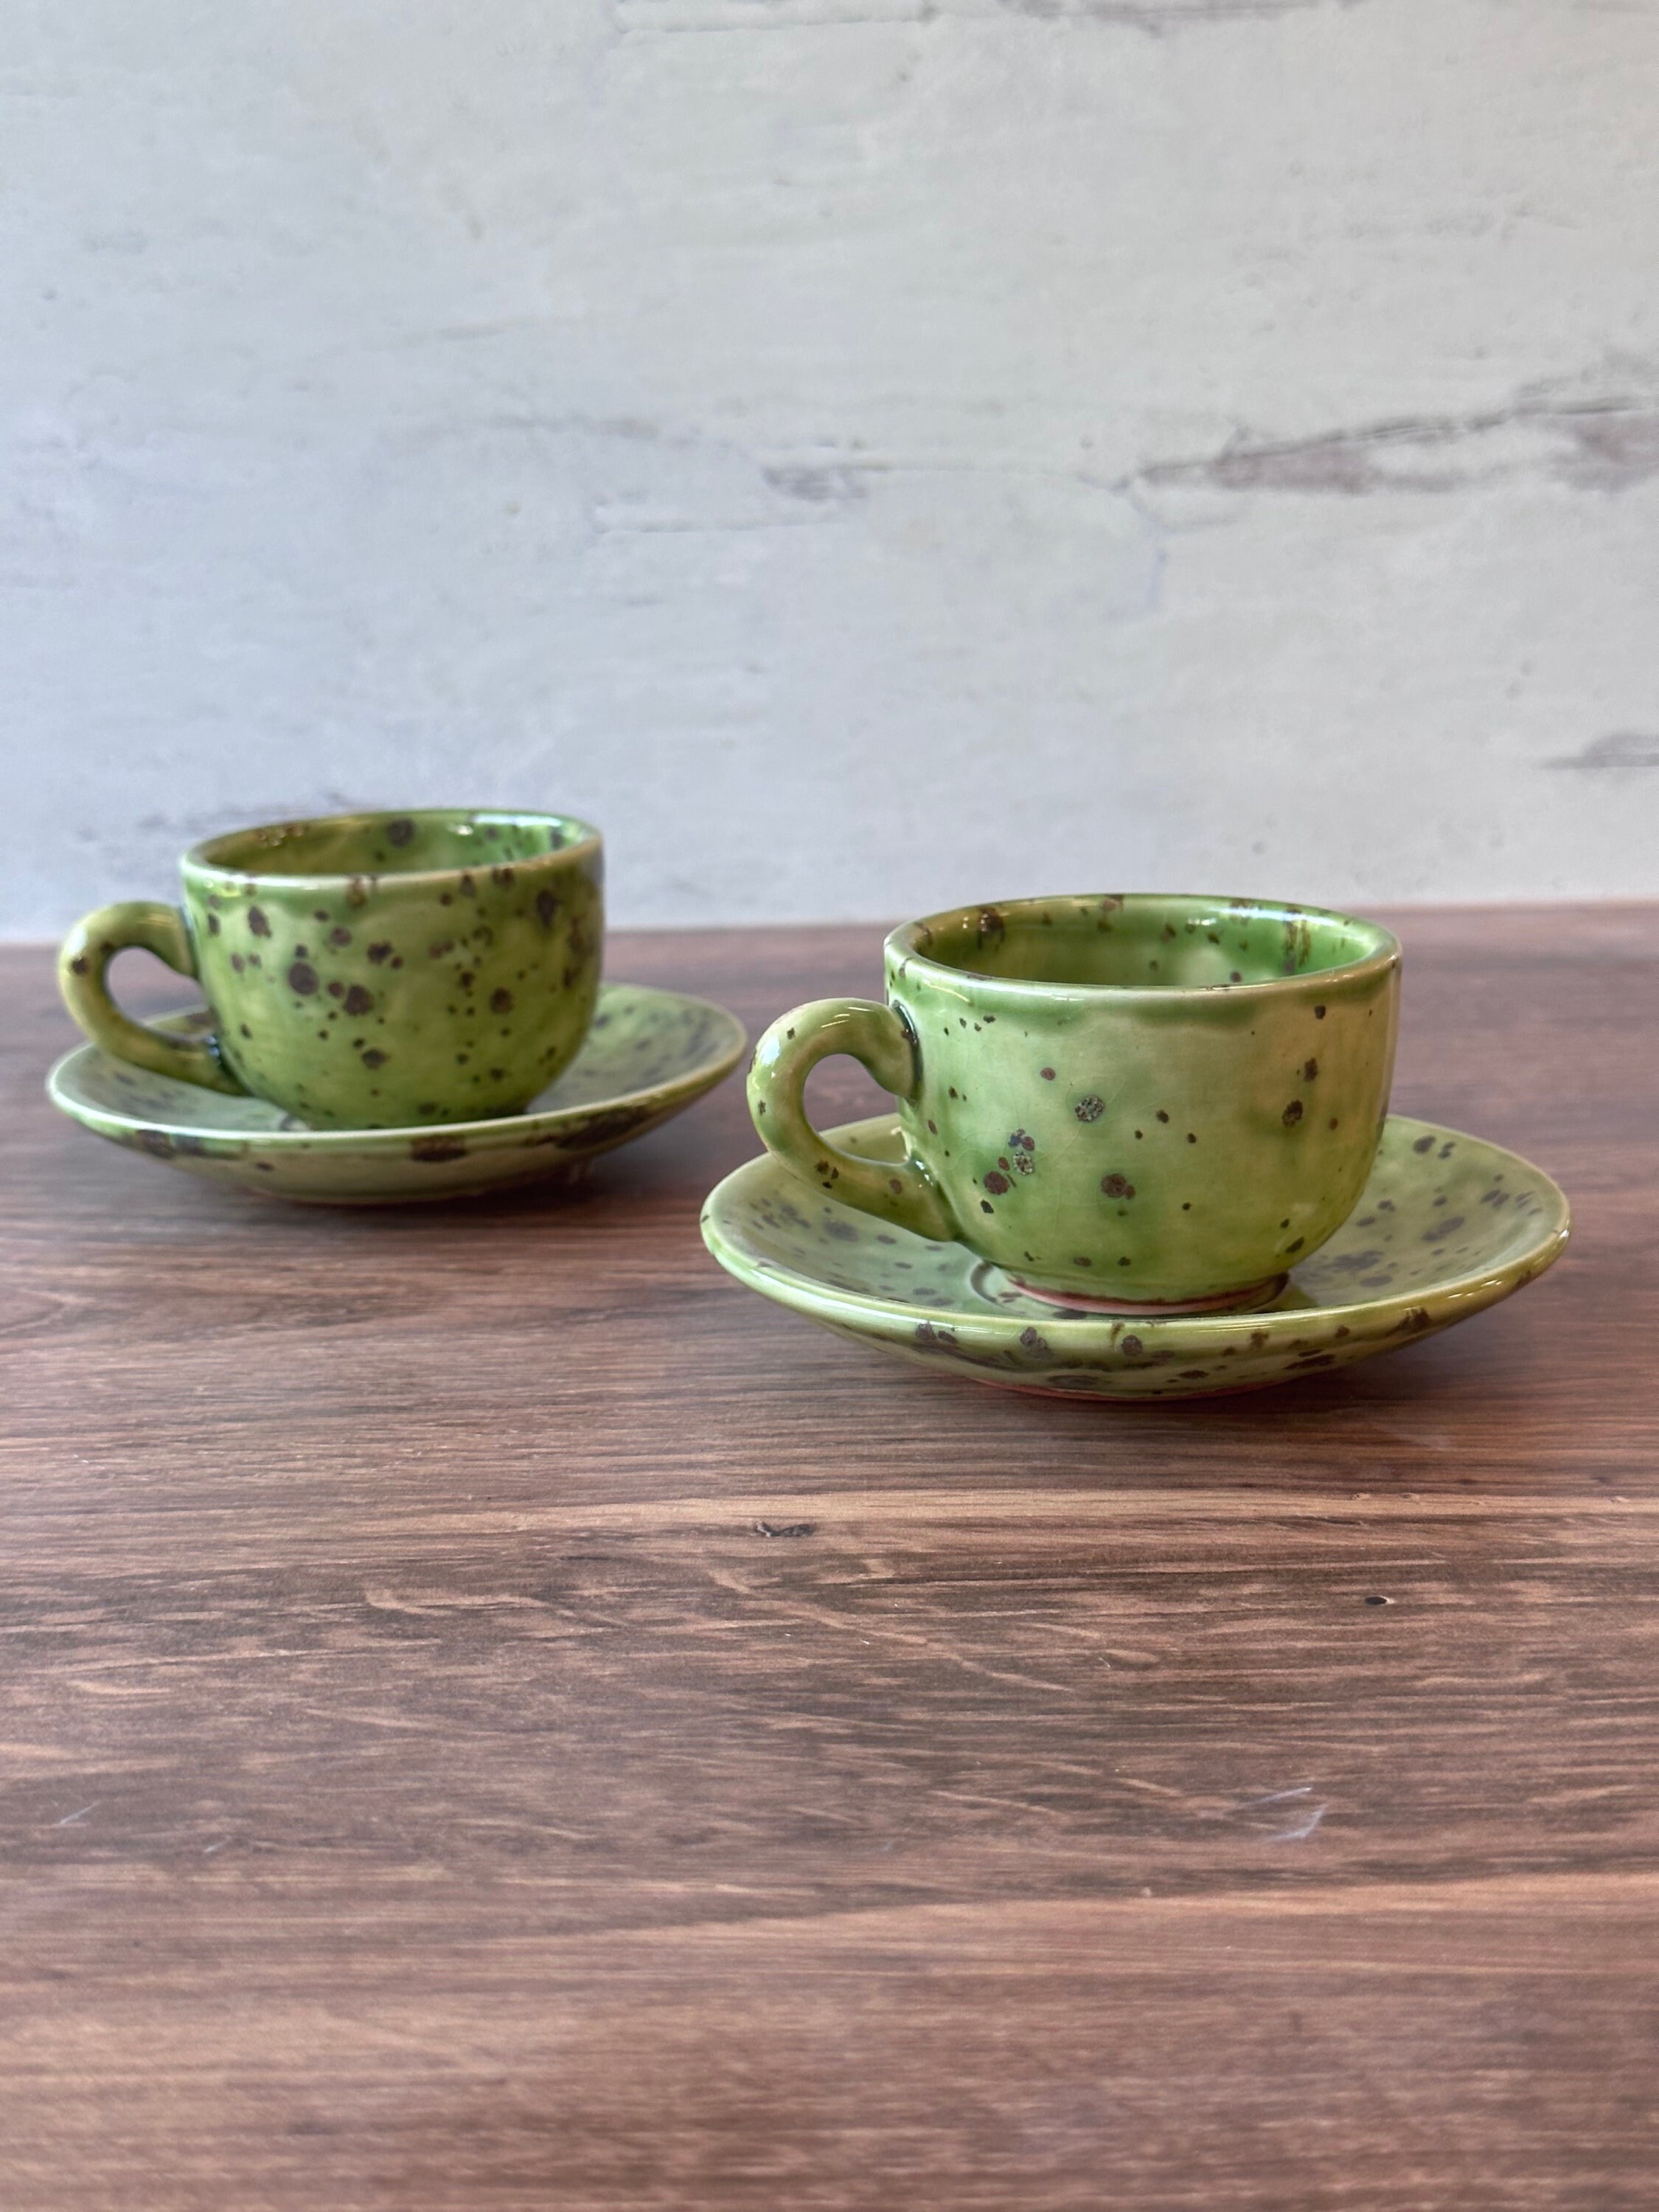 Espresso Cup and Saucer - White/green - Home All